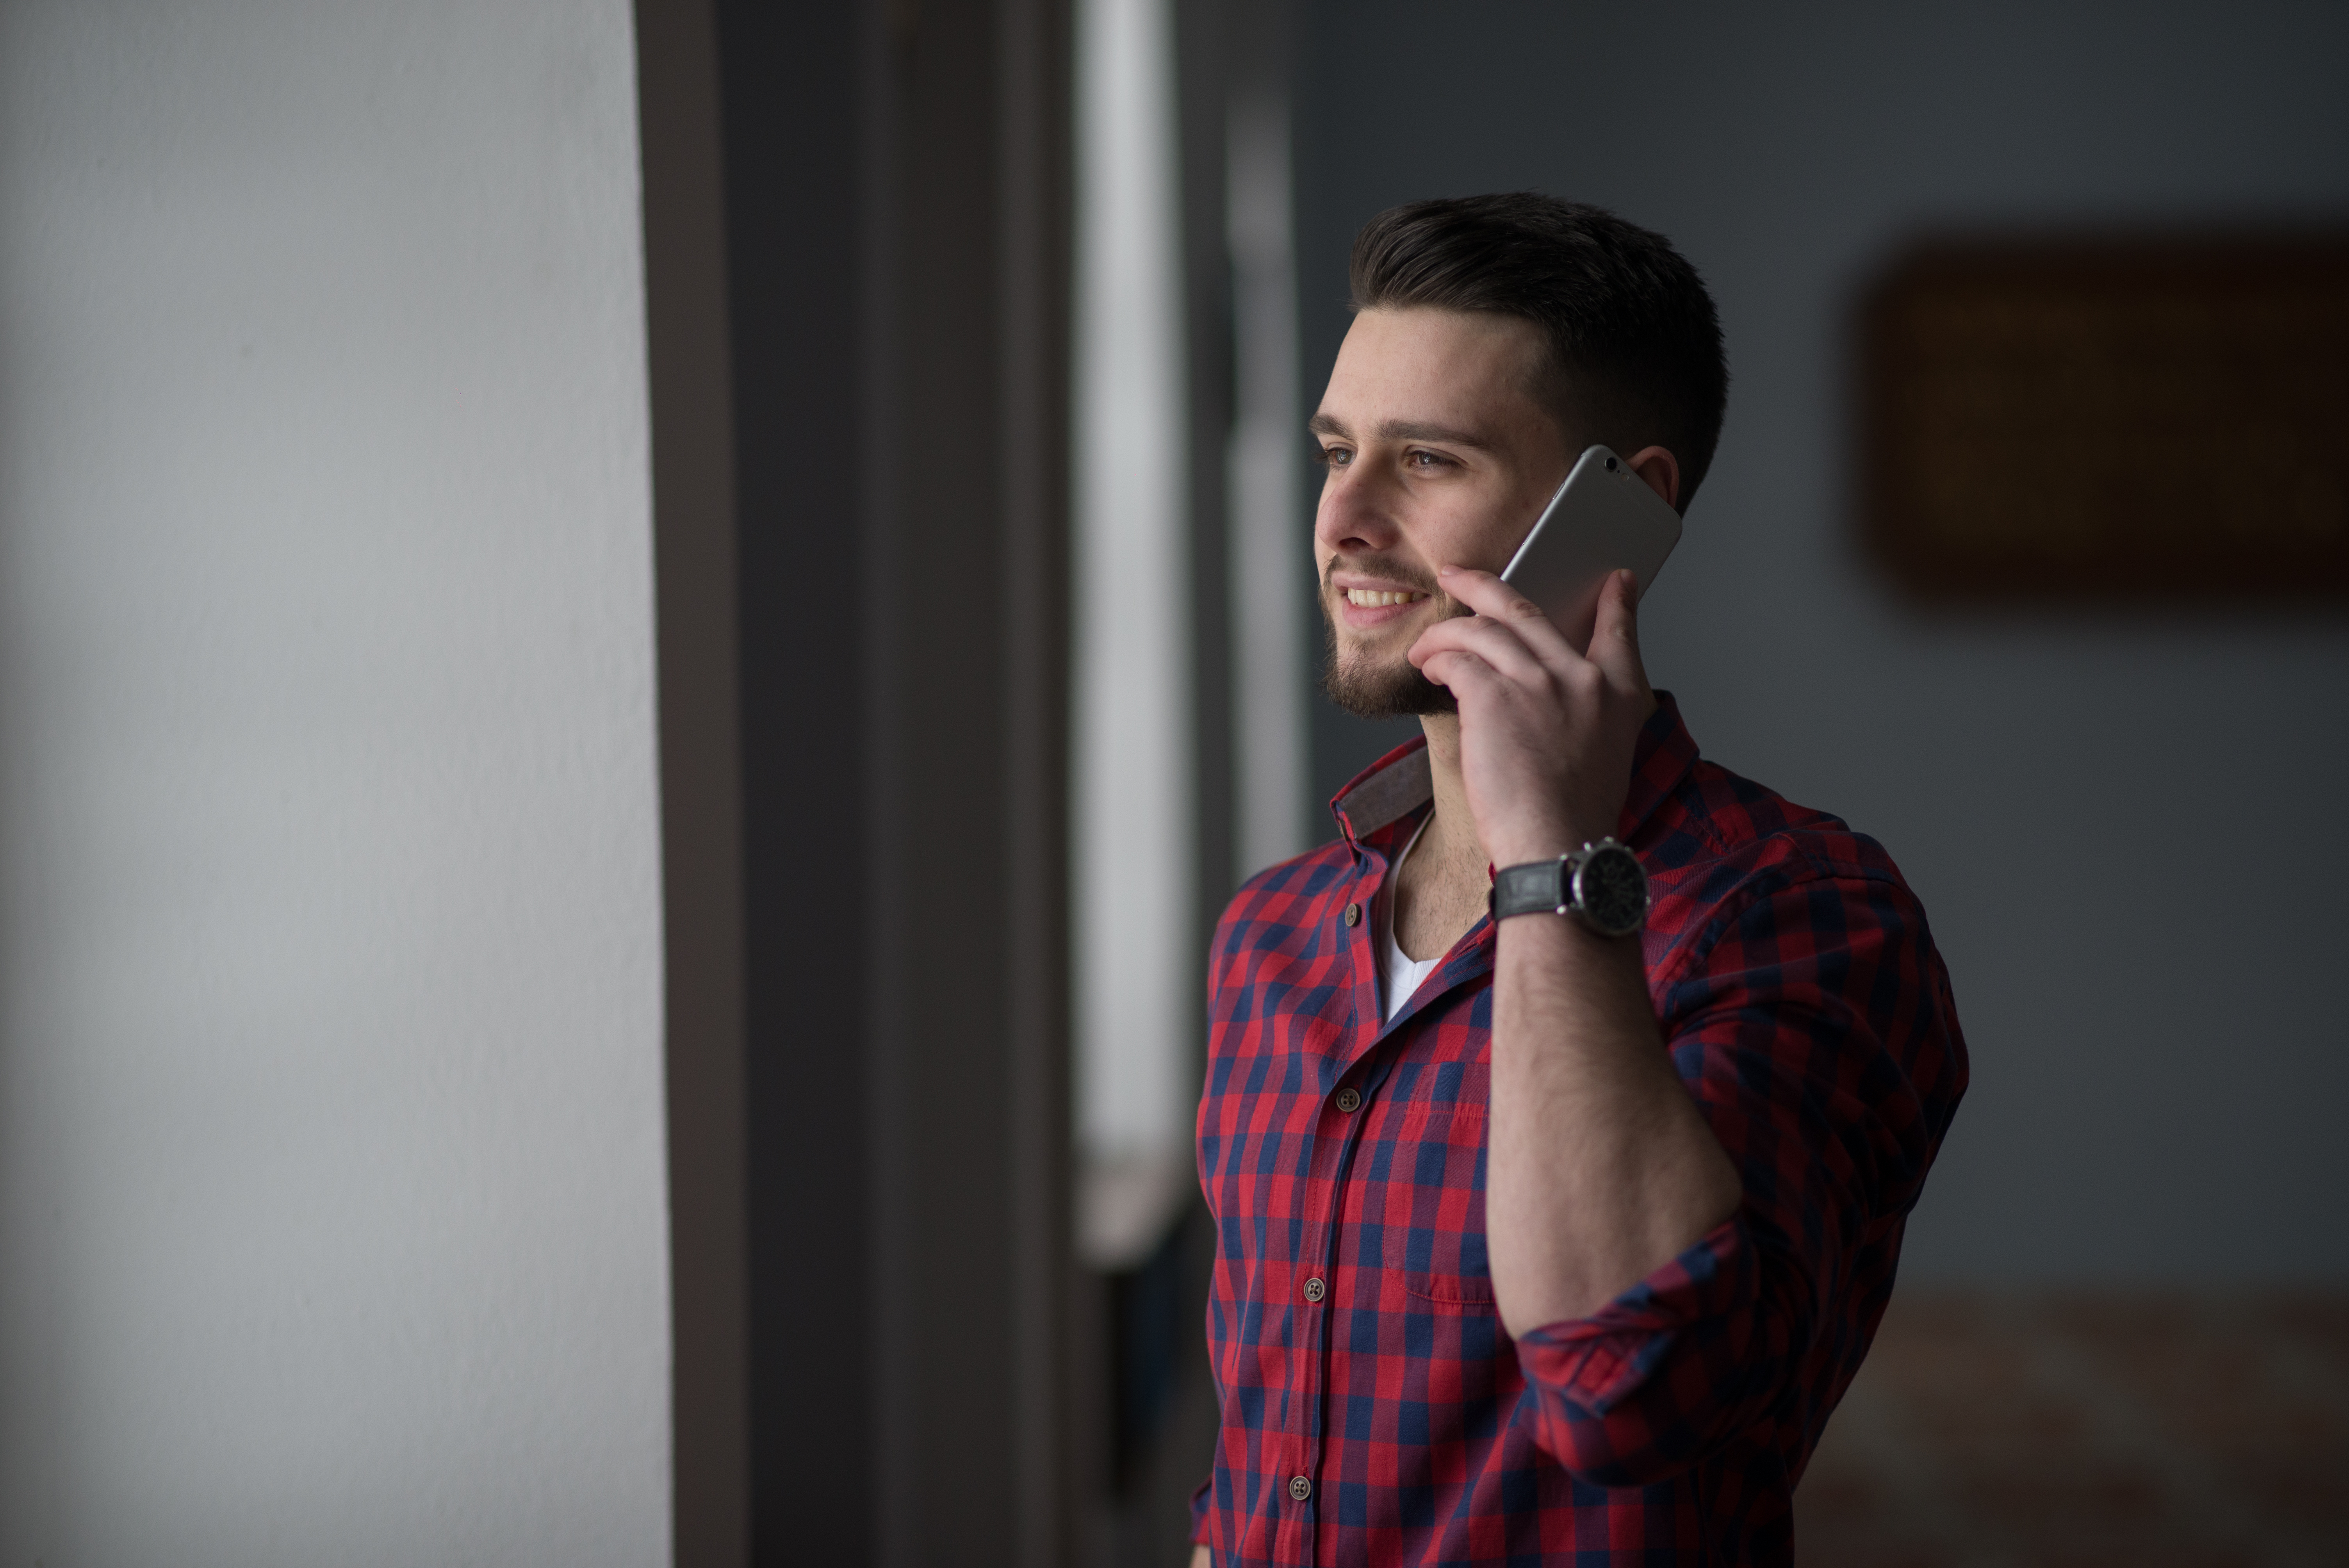 A young man talking on the phone | Source: Shutterstock